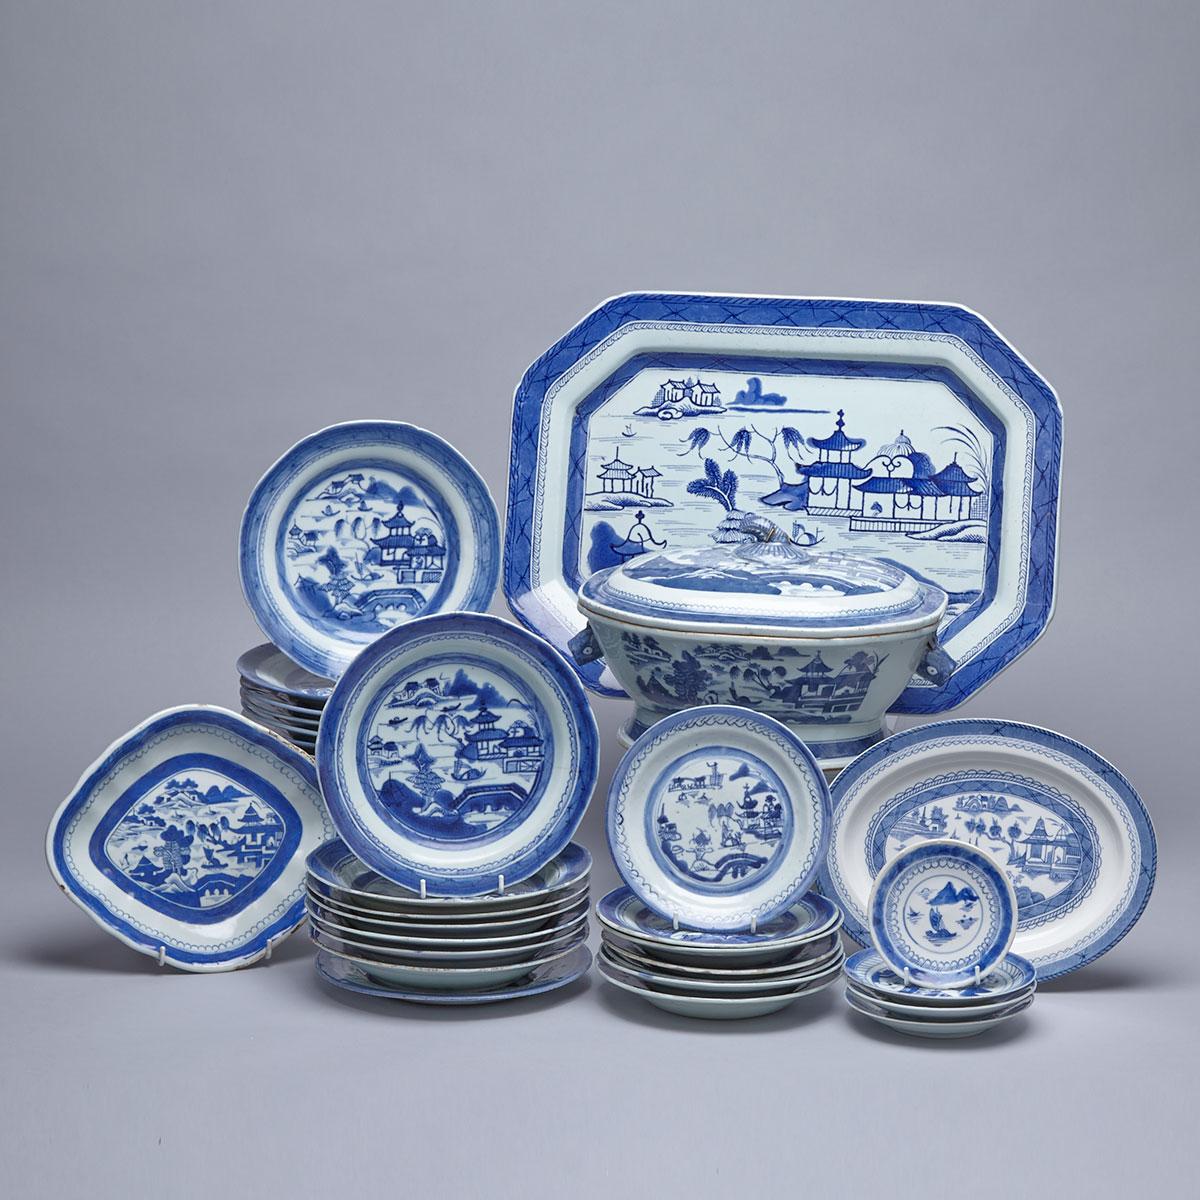 28 Assorted Blue and White Export Wares, 18th/19th Century